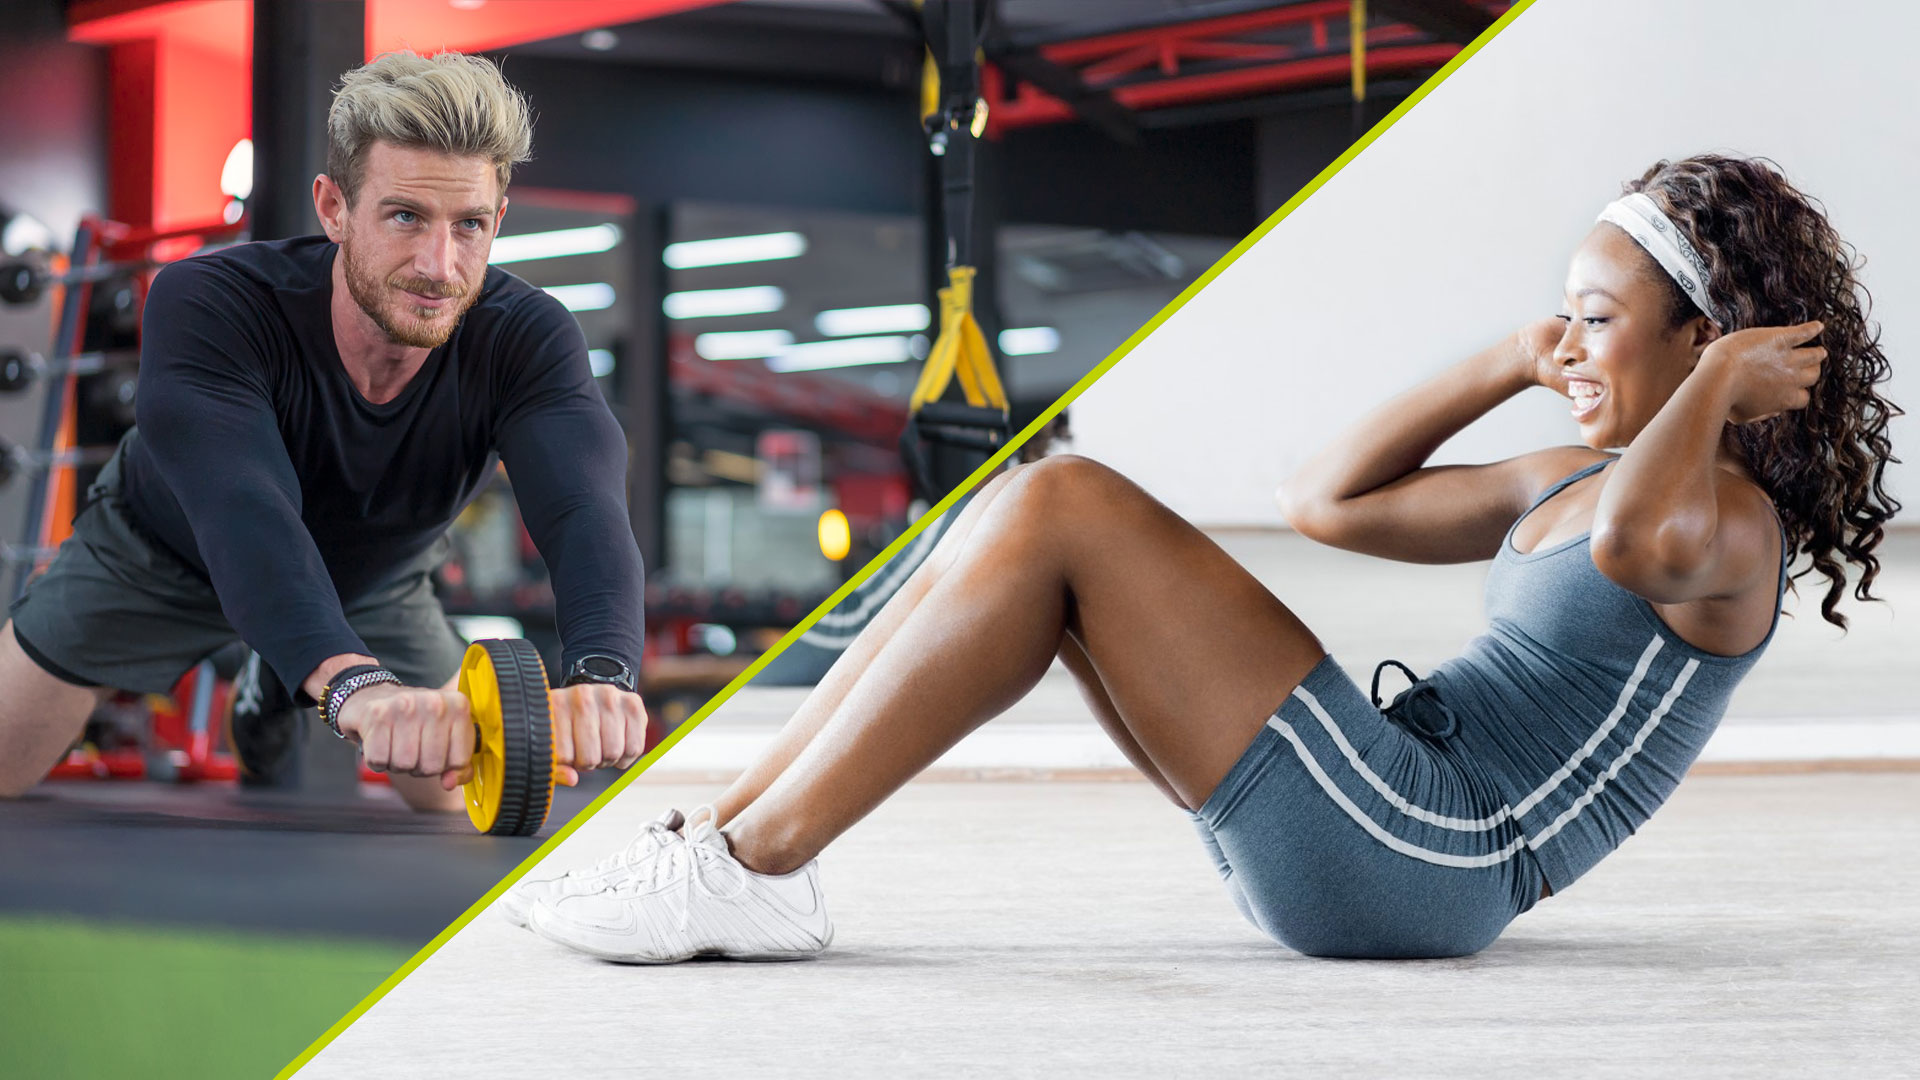 The Six Best Alternative Exercises to the Ab Wheel